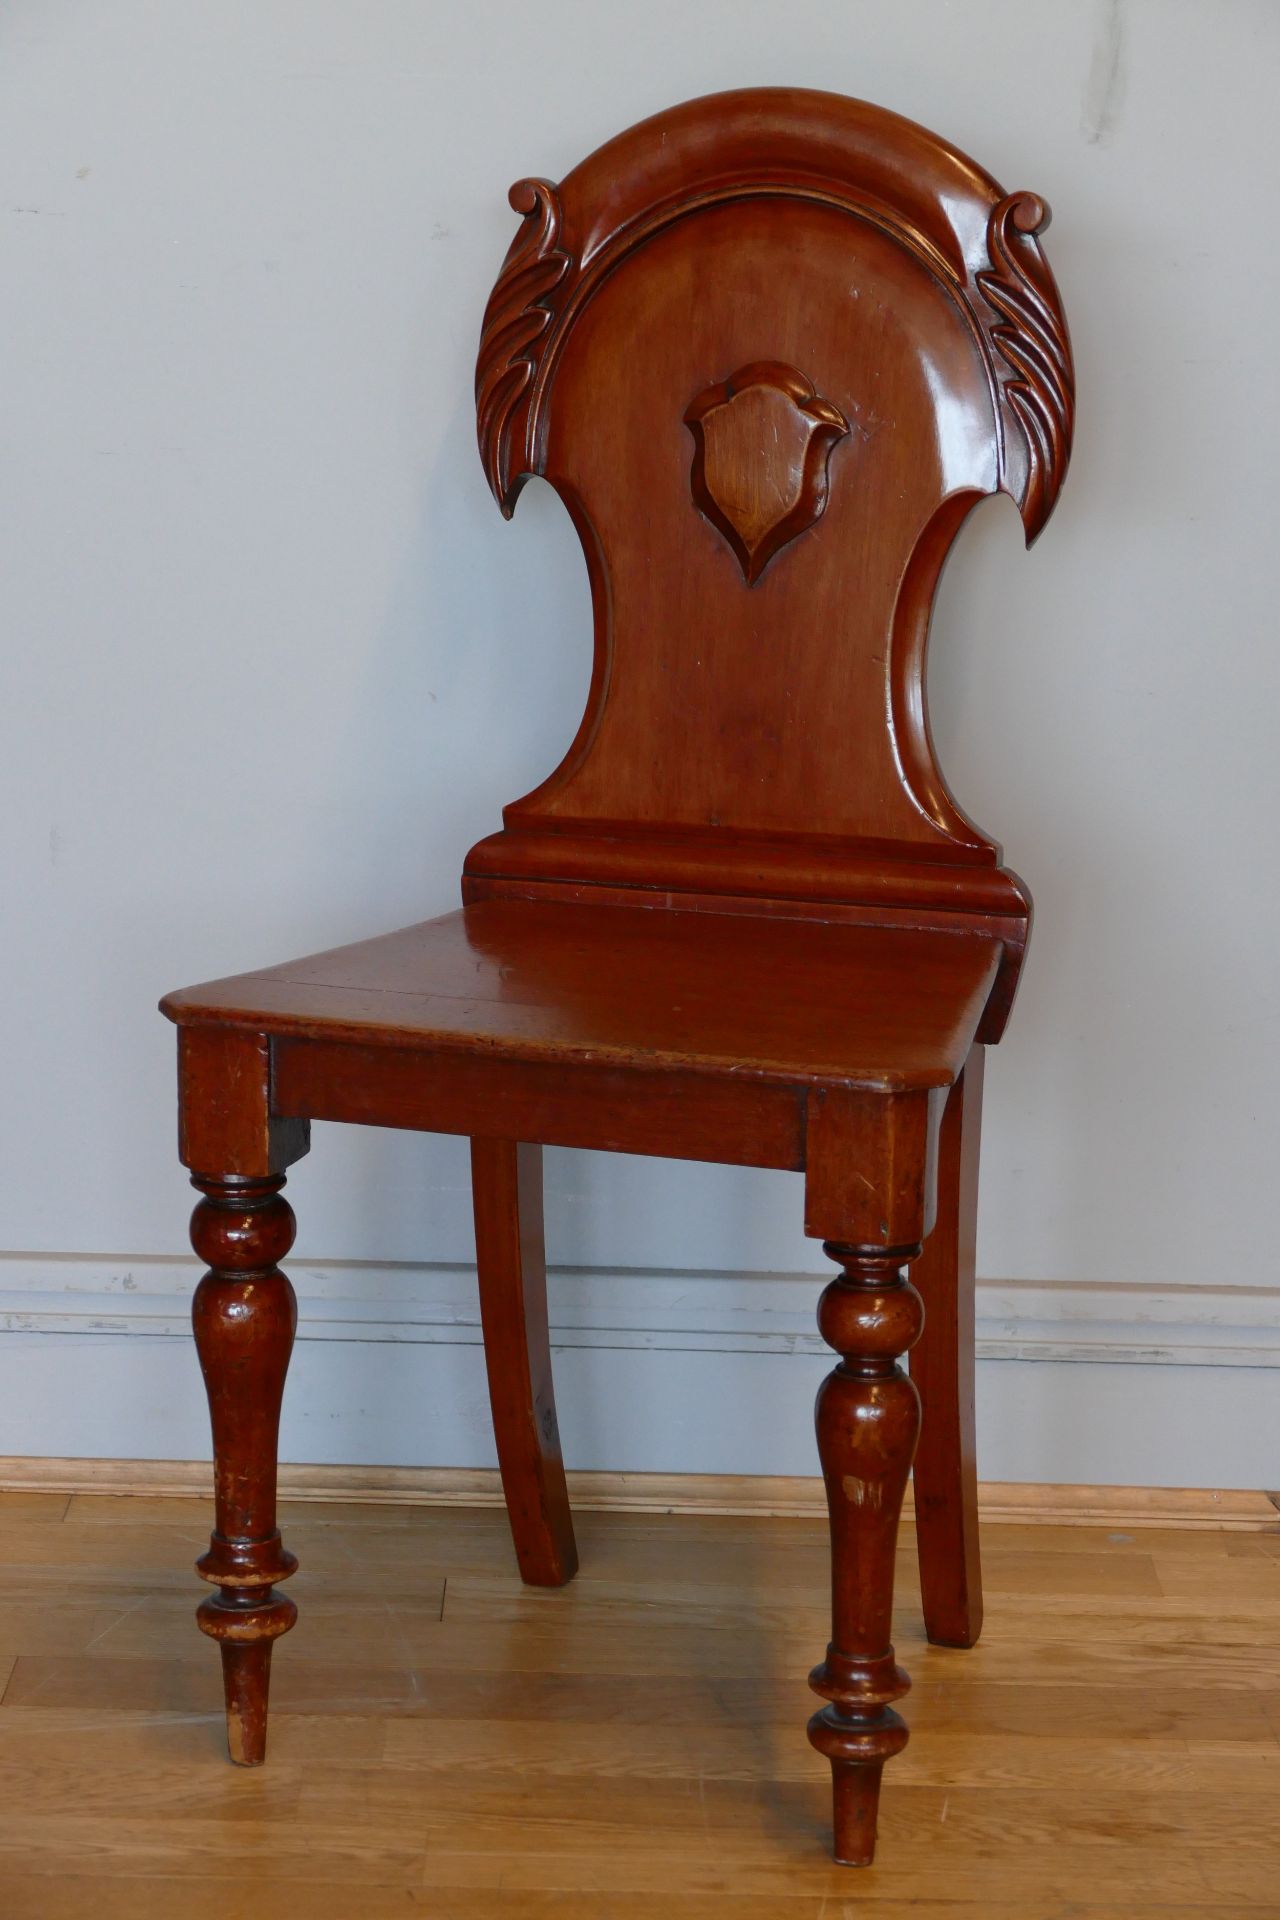 A G.W.R. station chair, label on base "G.W.R. to Swansea", with craved crest on backrest, tapered